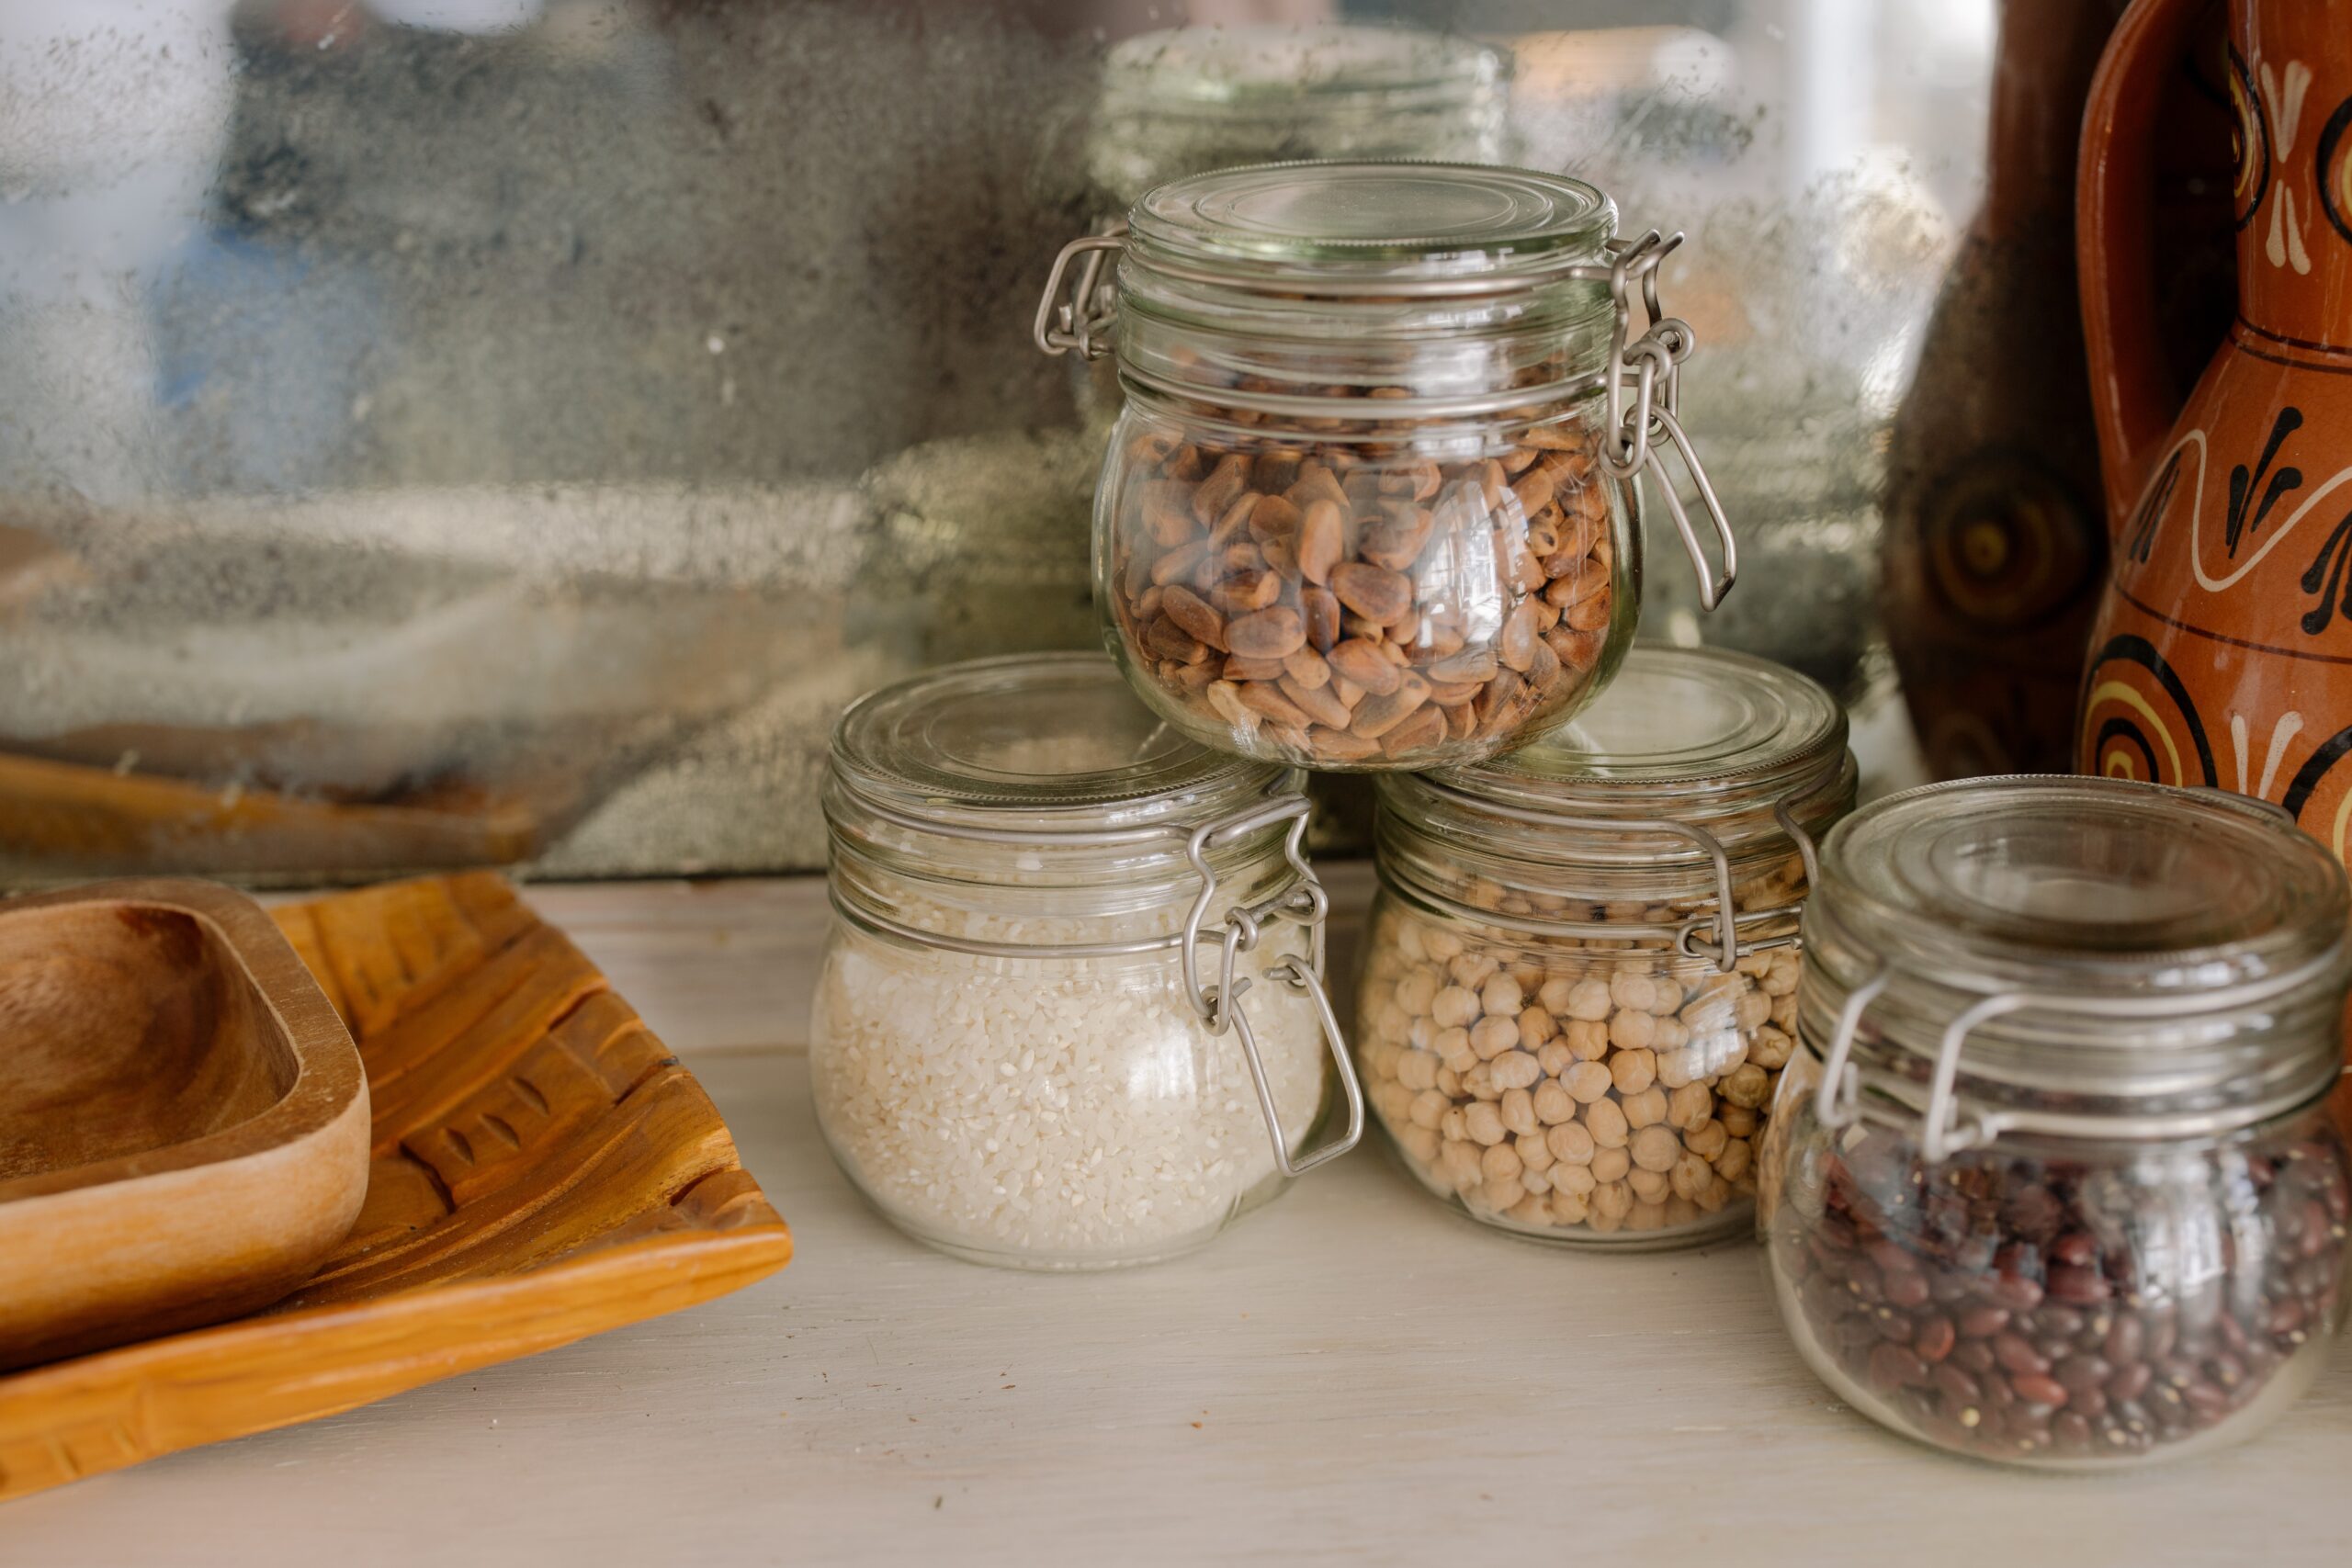 Clear, airtight containers for kitchen organization.